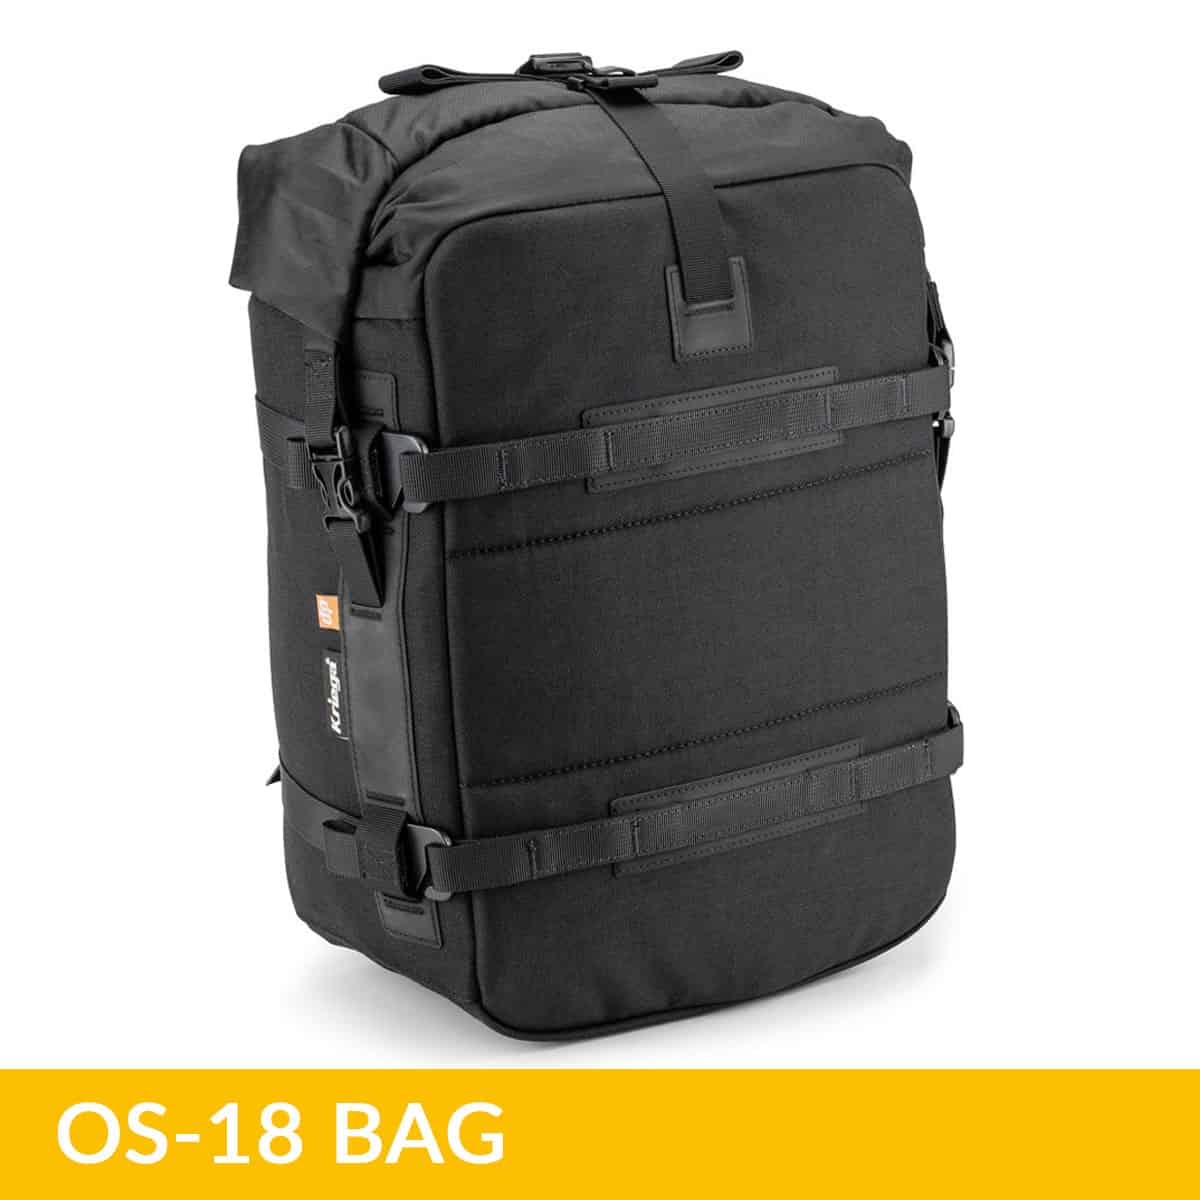 Kriega Overlander-S OS Packs: Serious luggage for serious adventures 18L Back